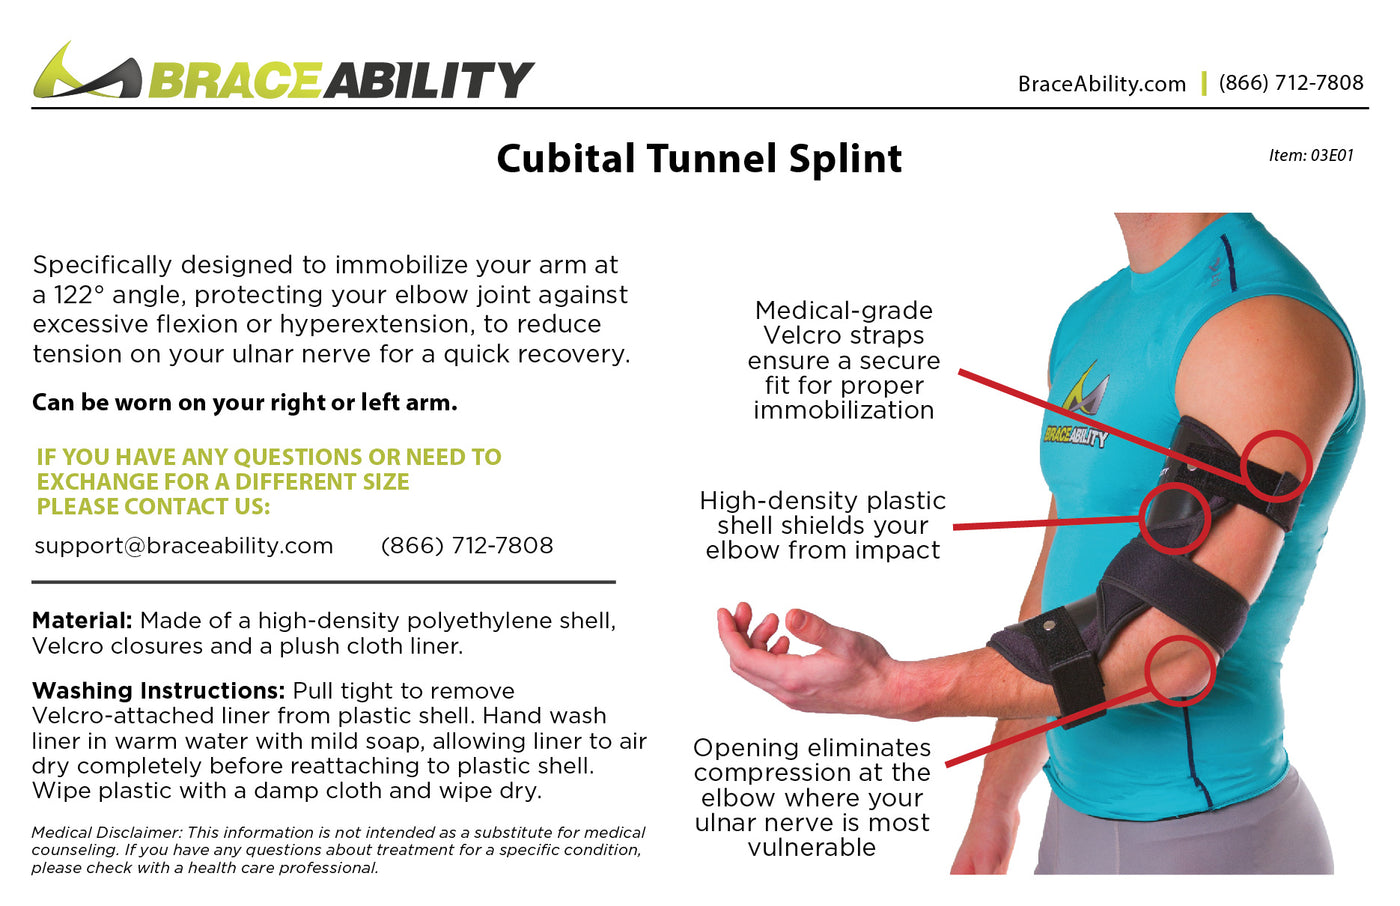 to clean the cubital tunnel splint, hand wash the shell with a damp cloth and mild detergent